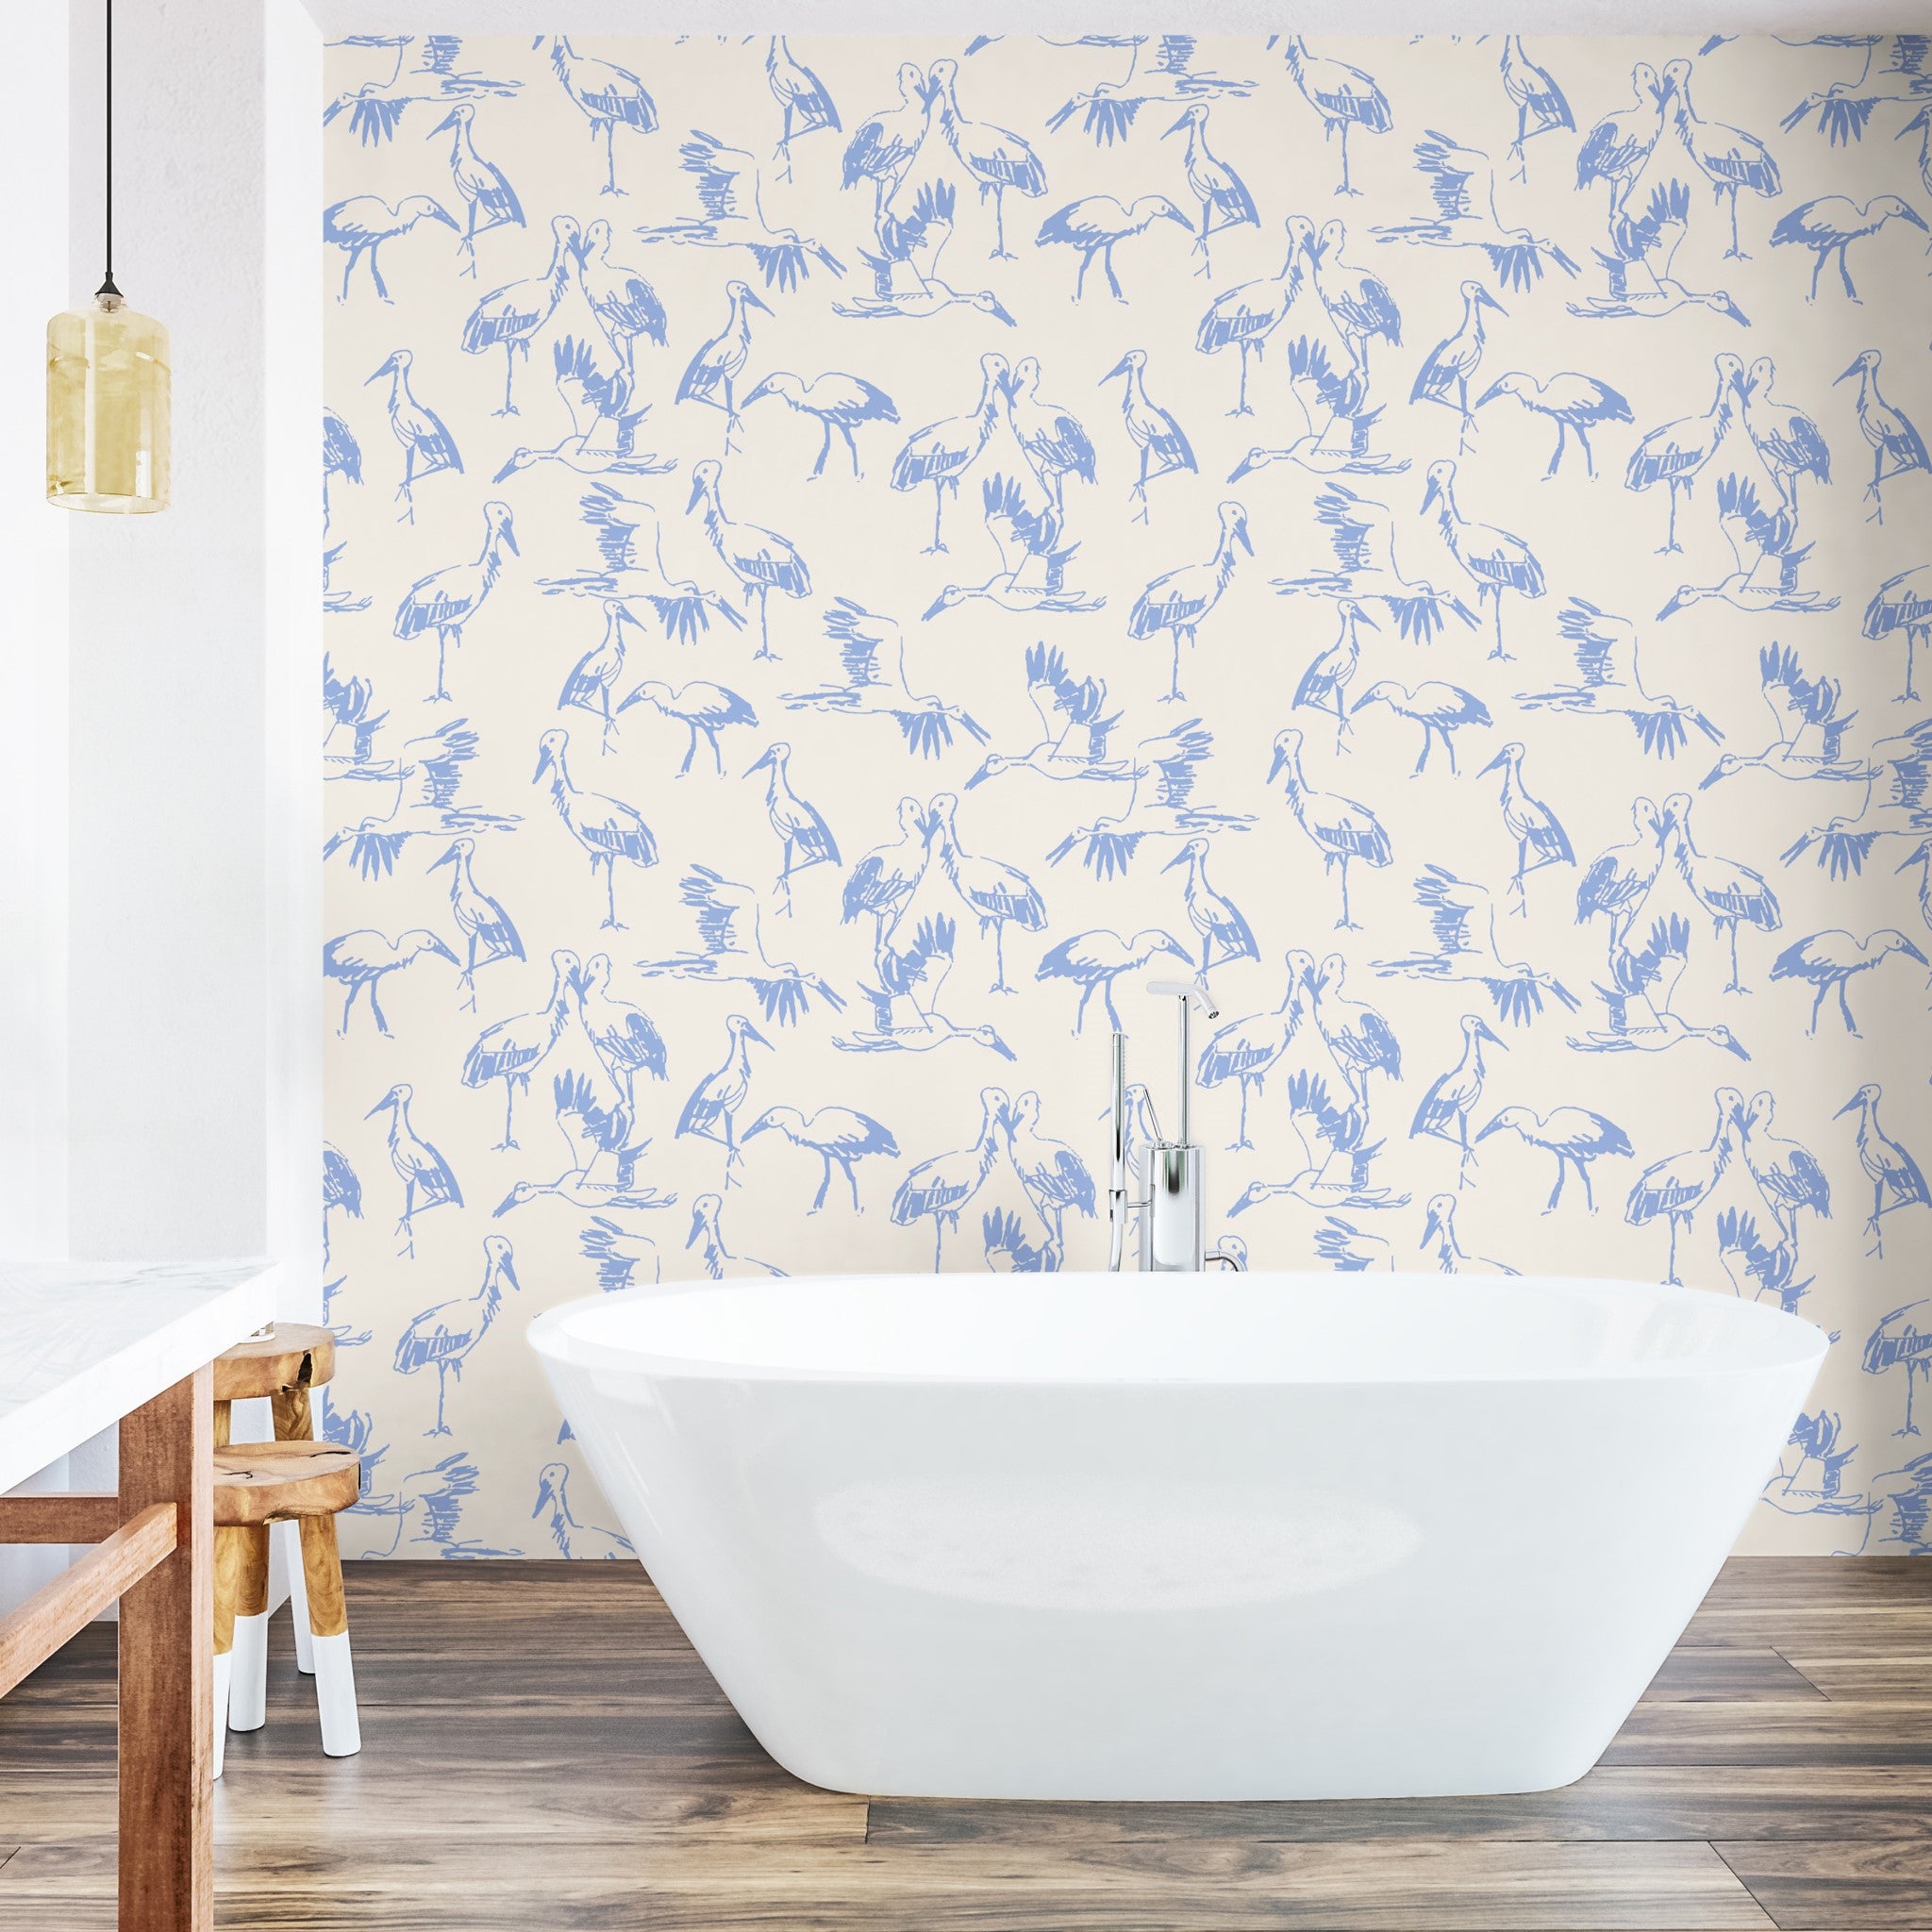 "Matteo and Malena Wallpaper by Wall Blush with blue bird patterns in a modern bathroom setting"